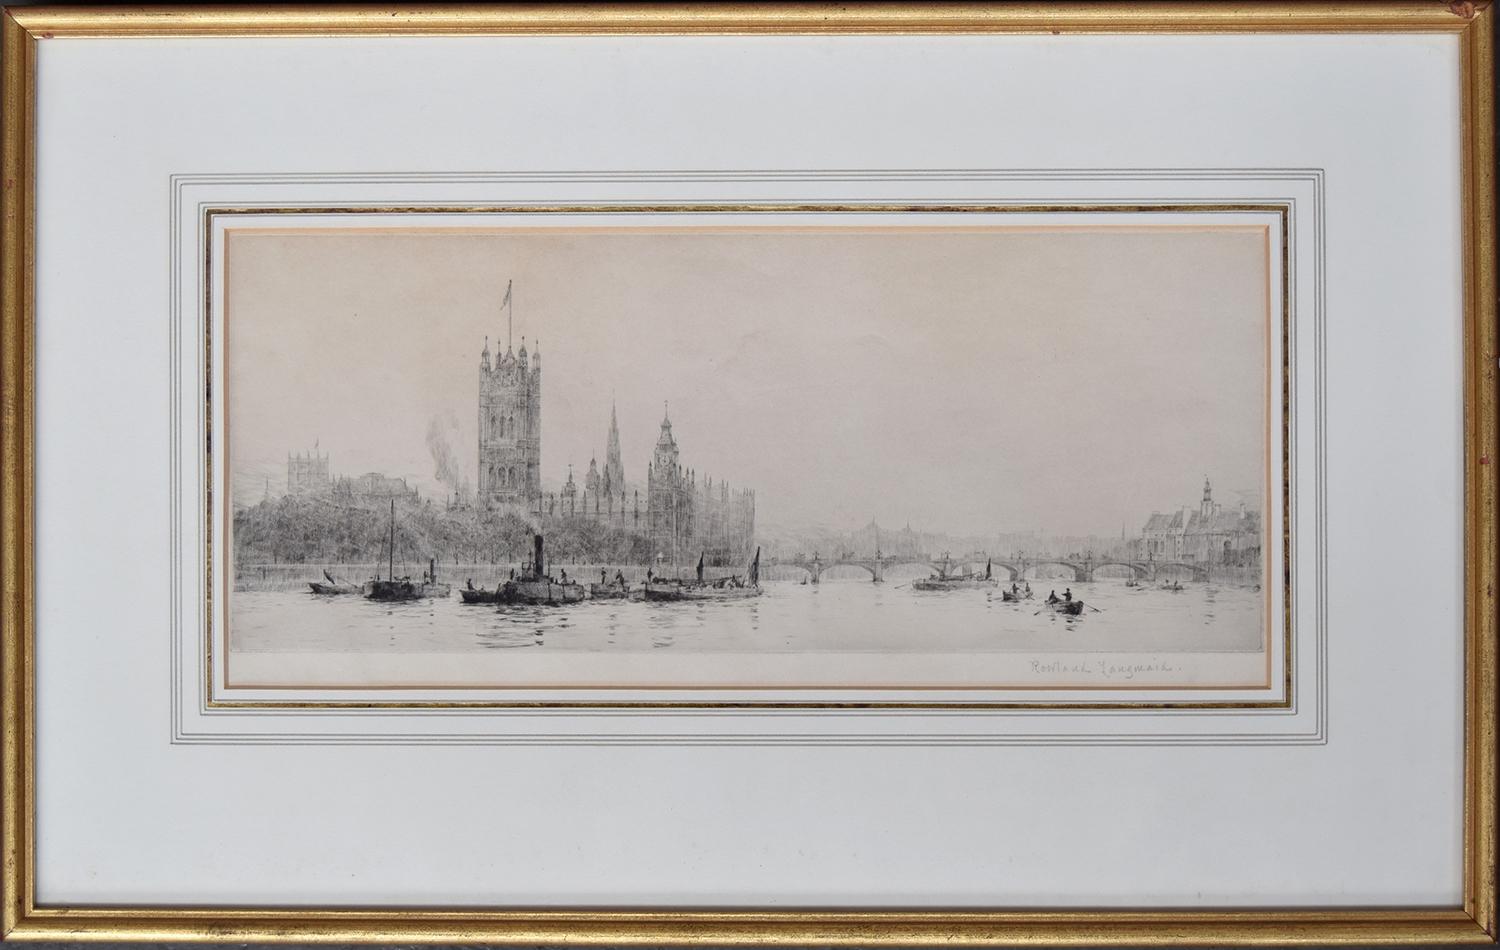 Rowland Langmaid (1897-1956), 'The Houses of Parliament and Westminster Bridge', drypoint etching, - Image 2 of 2